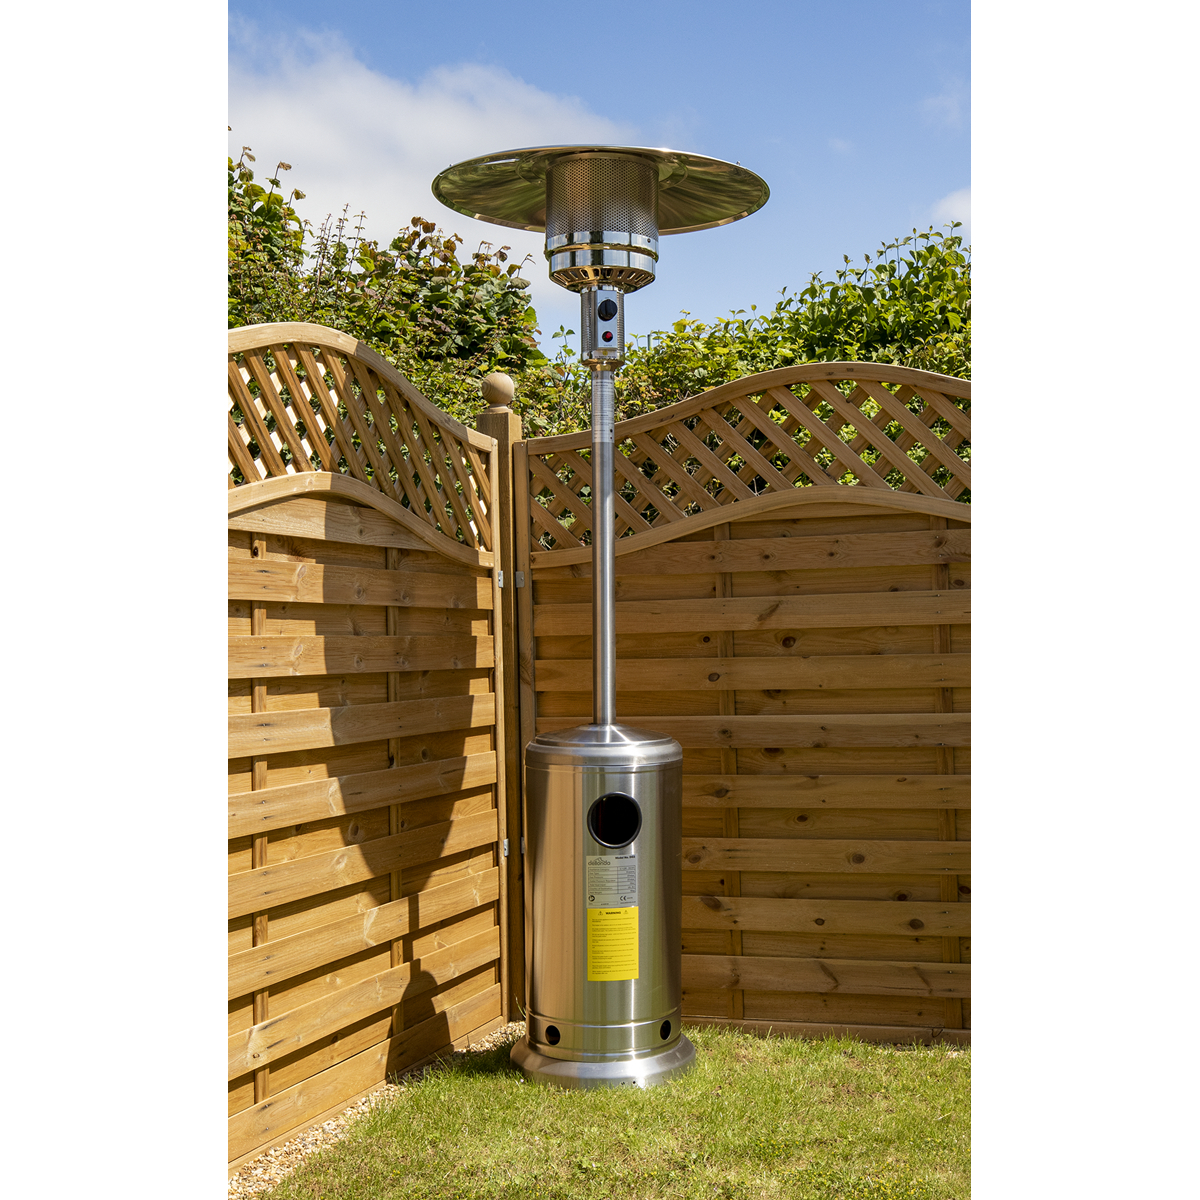 Dg2 Propane Gas Tower Patio Heater 13kw Stainless Steel throughout dimensions 1200 X 1200